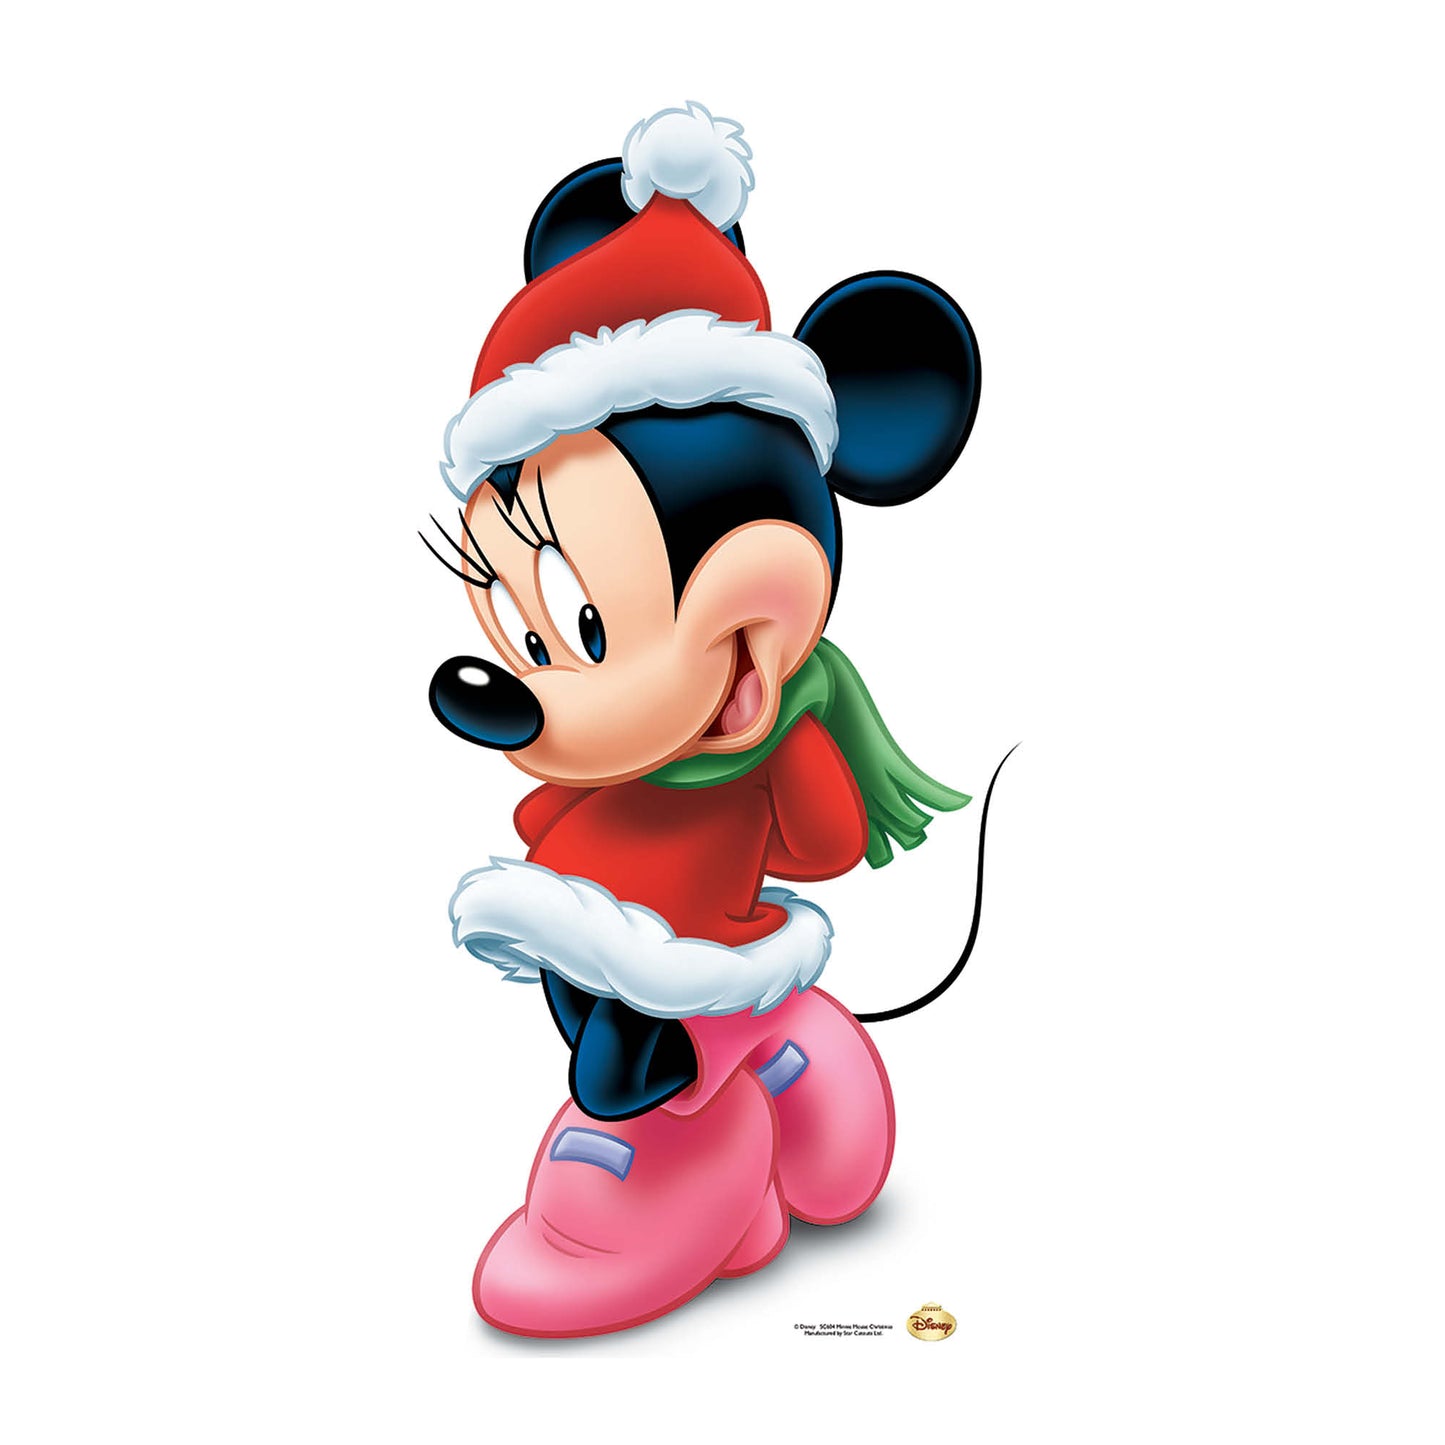 SC604 Minnie Mouse Christmas (Star Mini Cut-out) Cardboard Cut Out Height 85cm